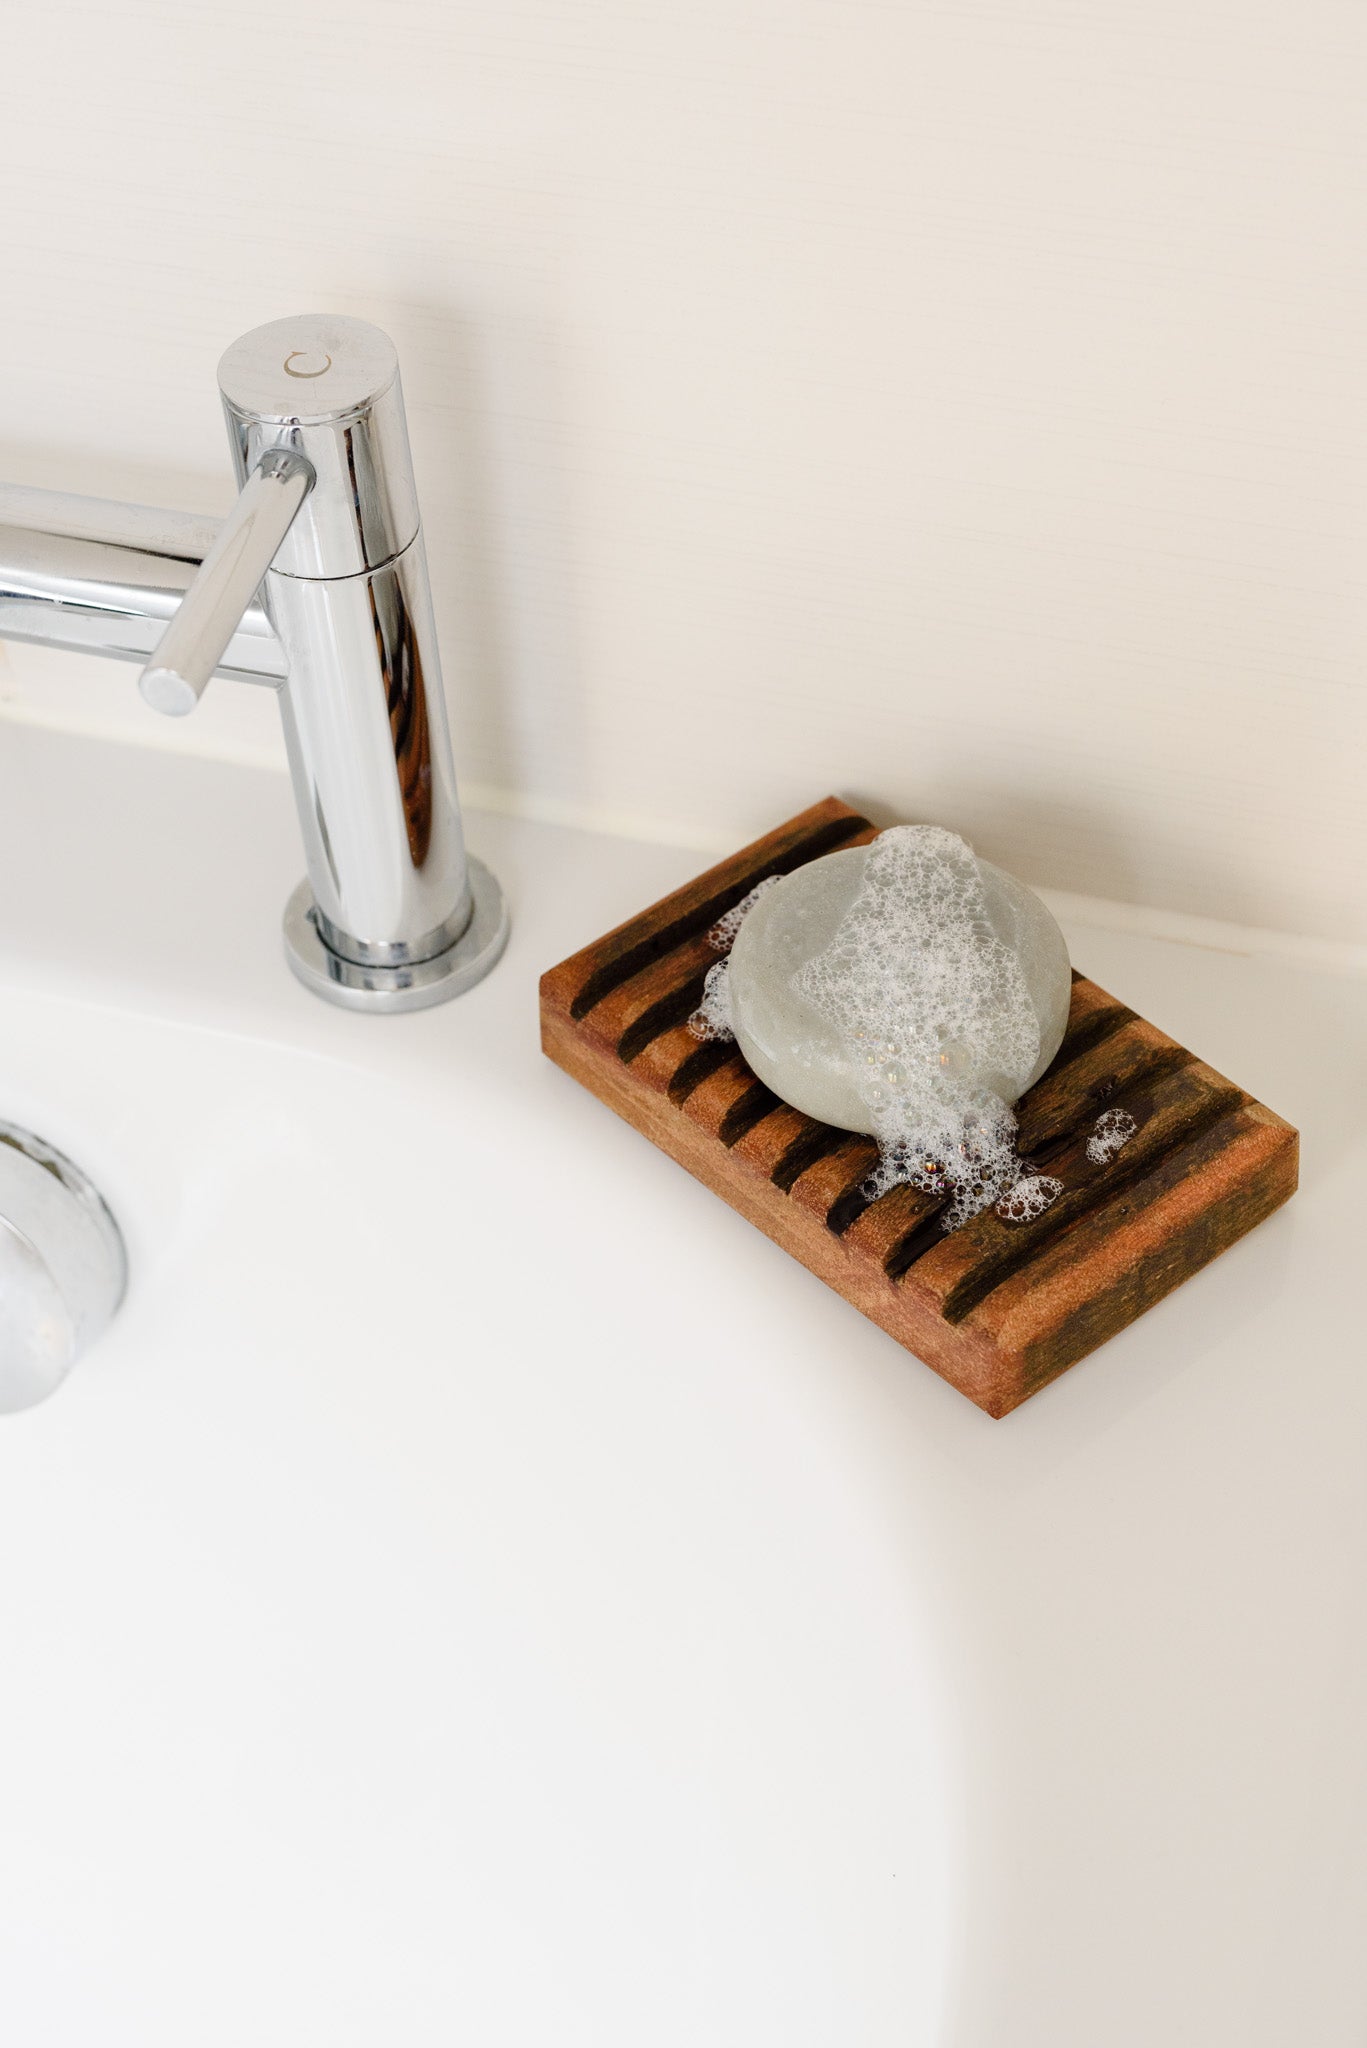 The round grey shampoo bar, foamy and bubbly, placed on a wooden tray, resting on a white sink, next to a silver tap.